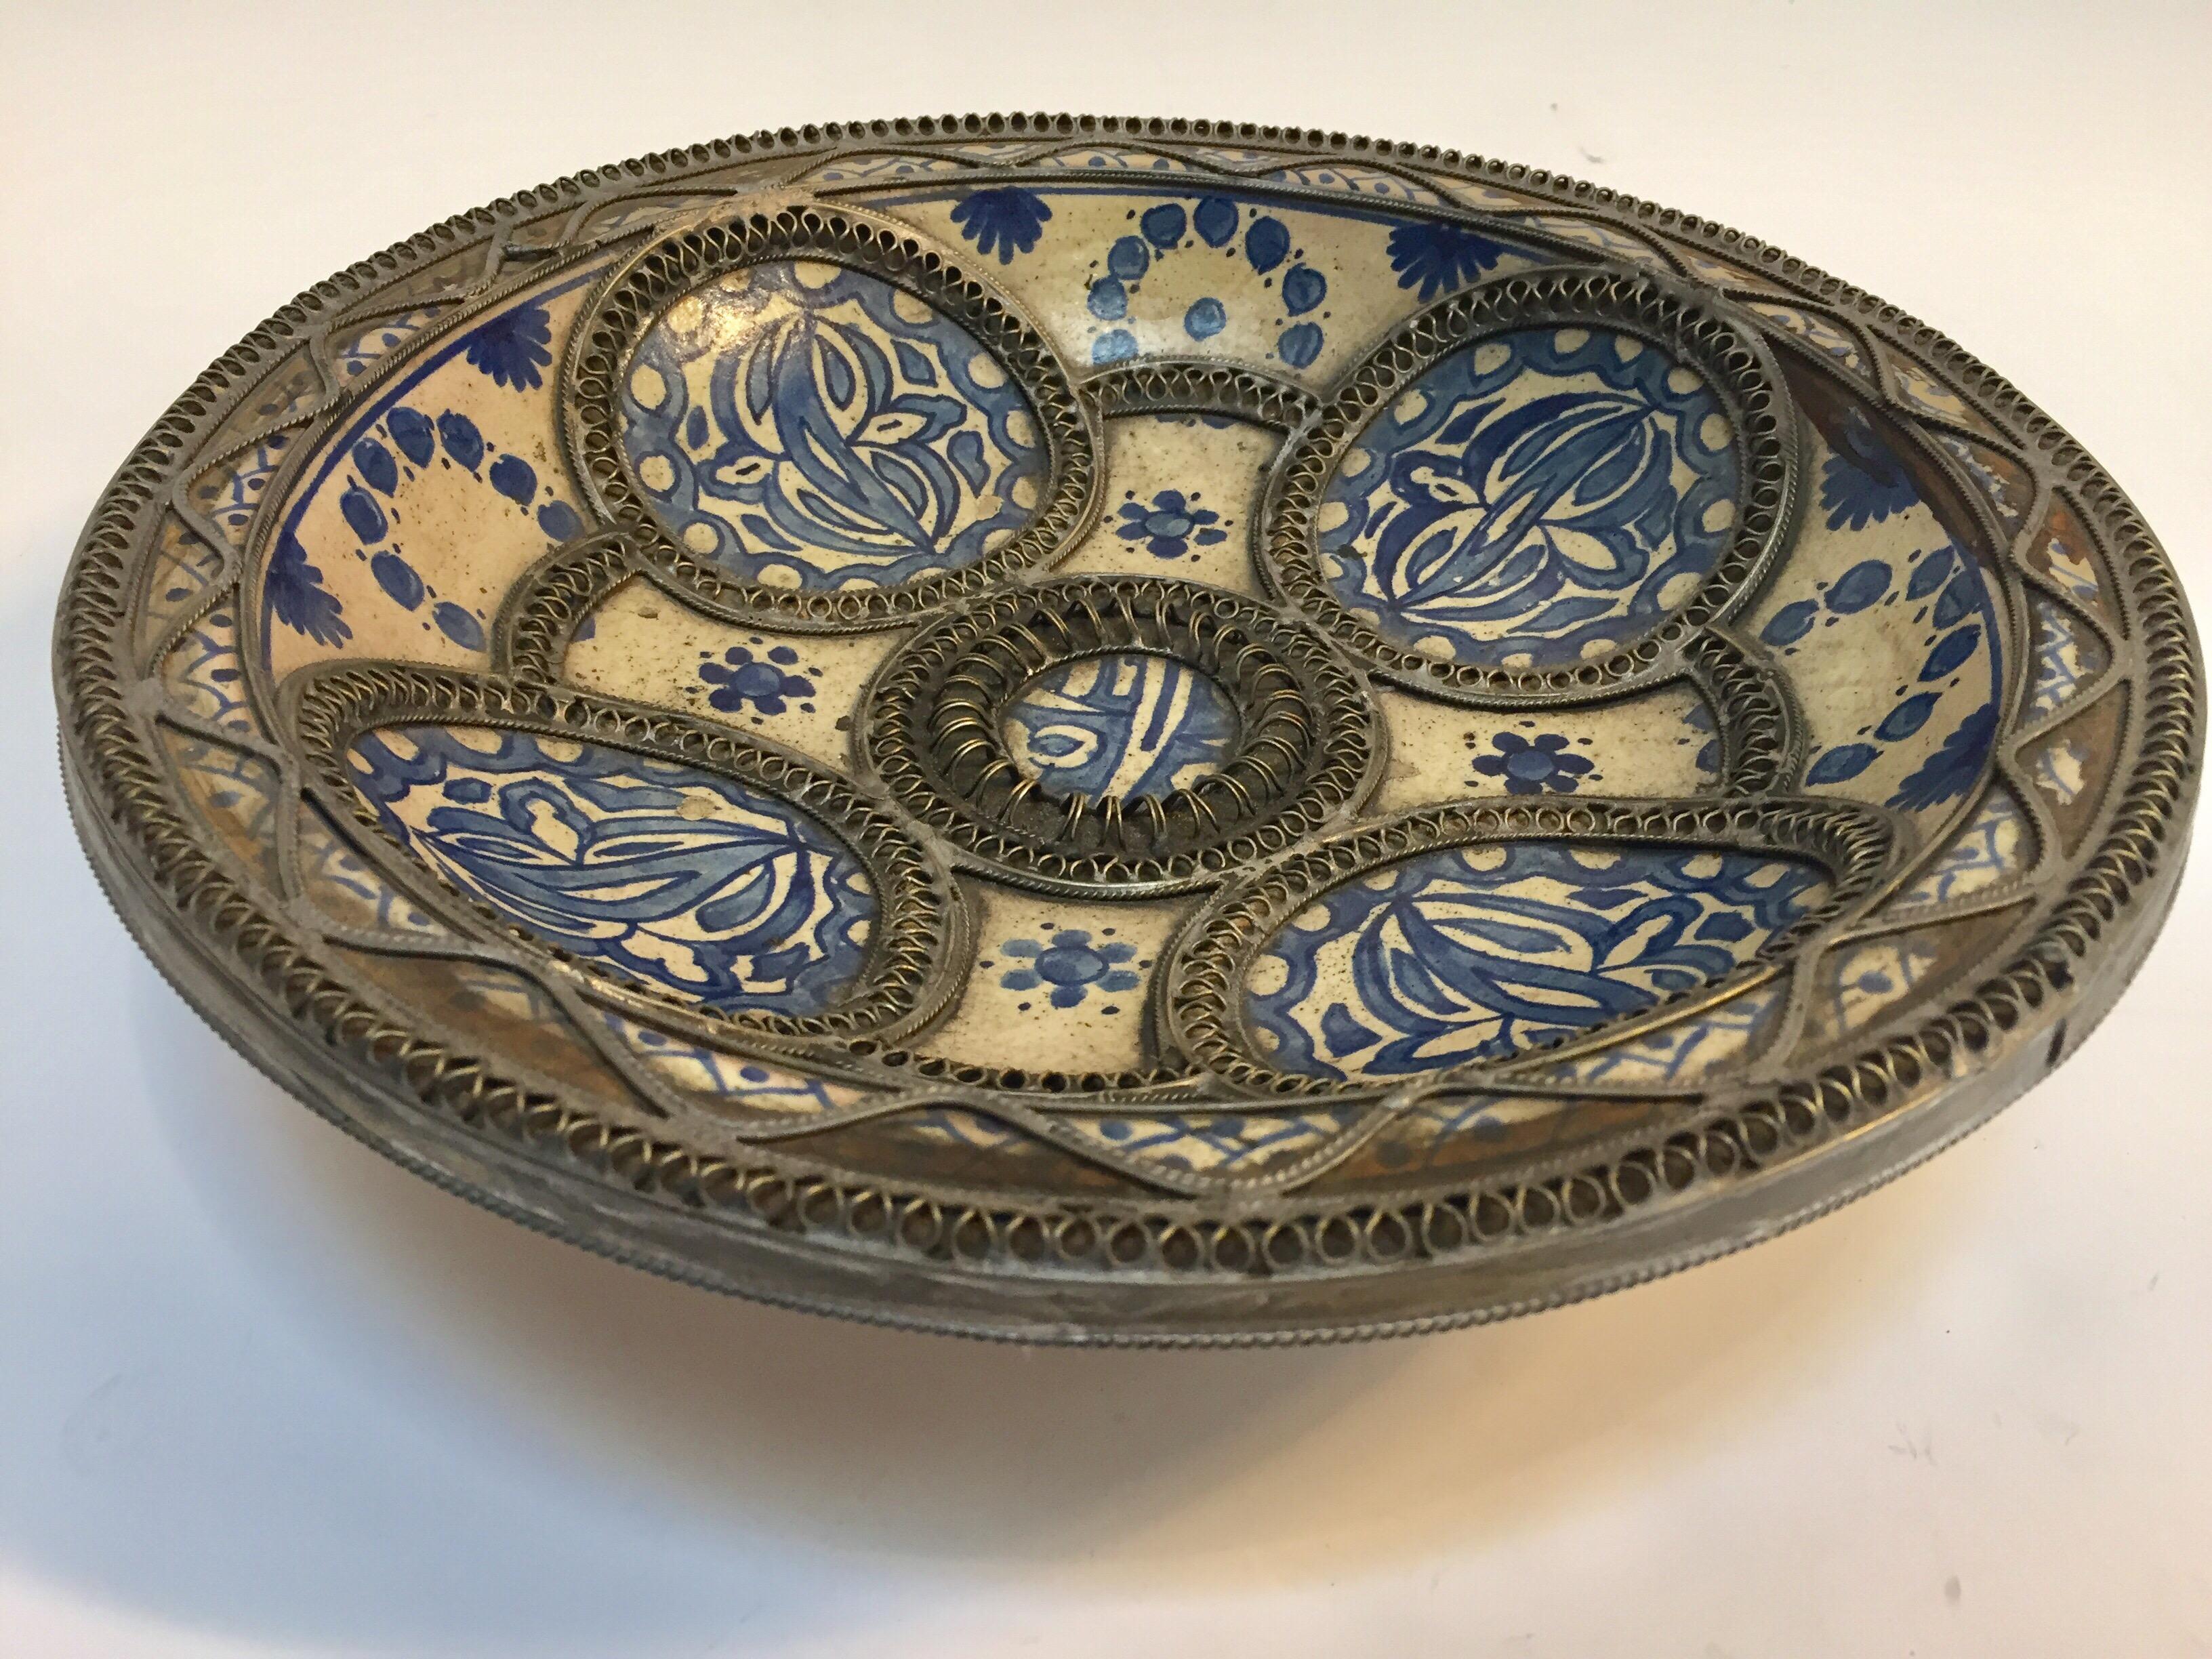 Moorish Decorative Moroccan Blue and White Handcrafted Ceramic Bowl from Fez